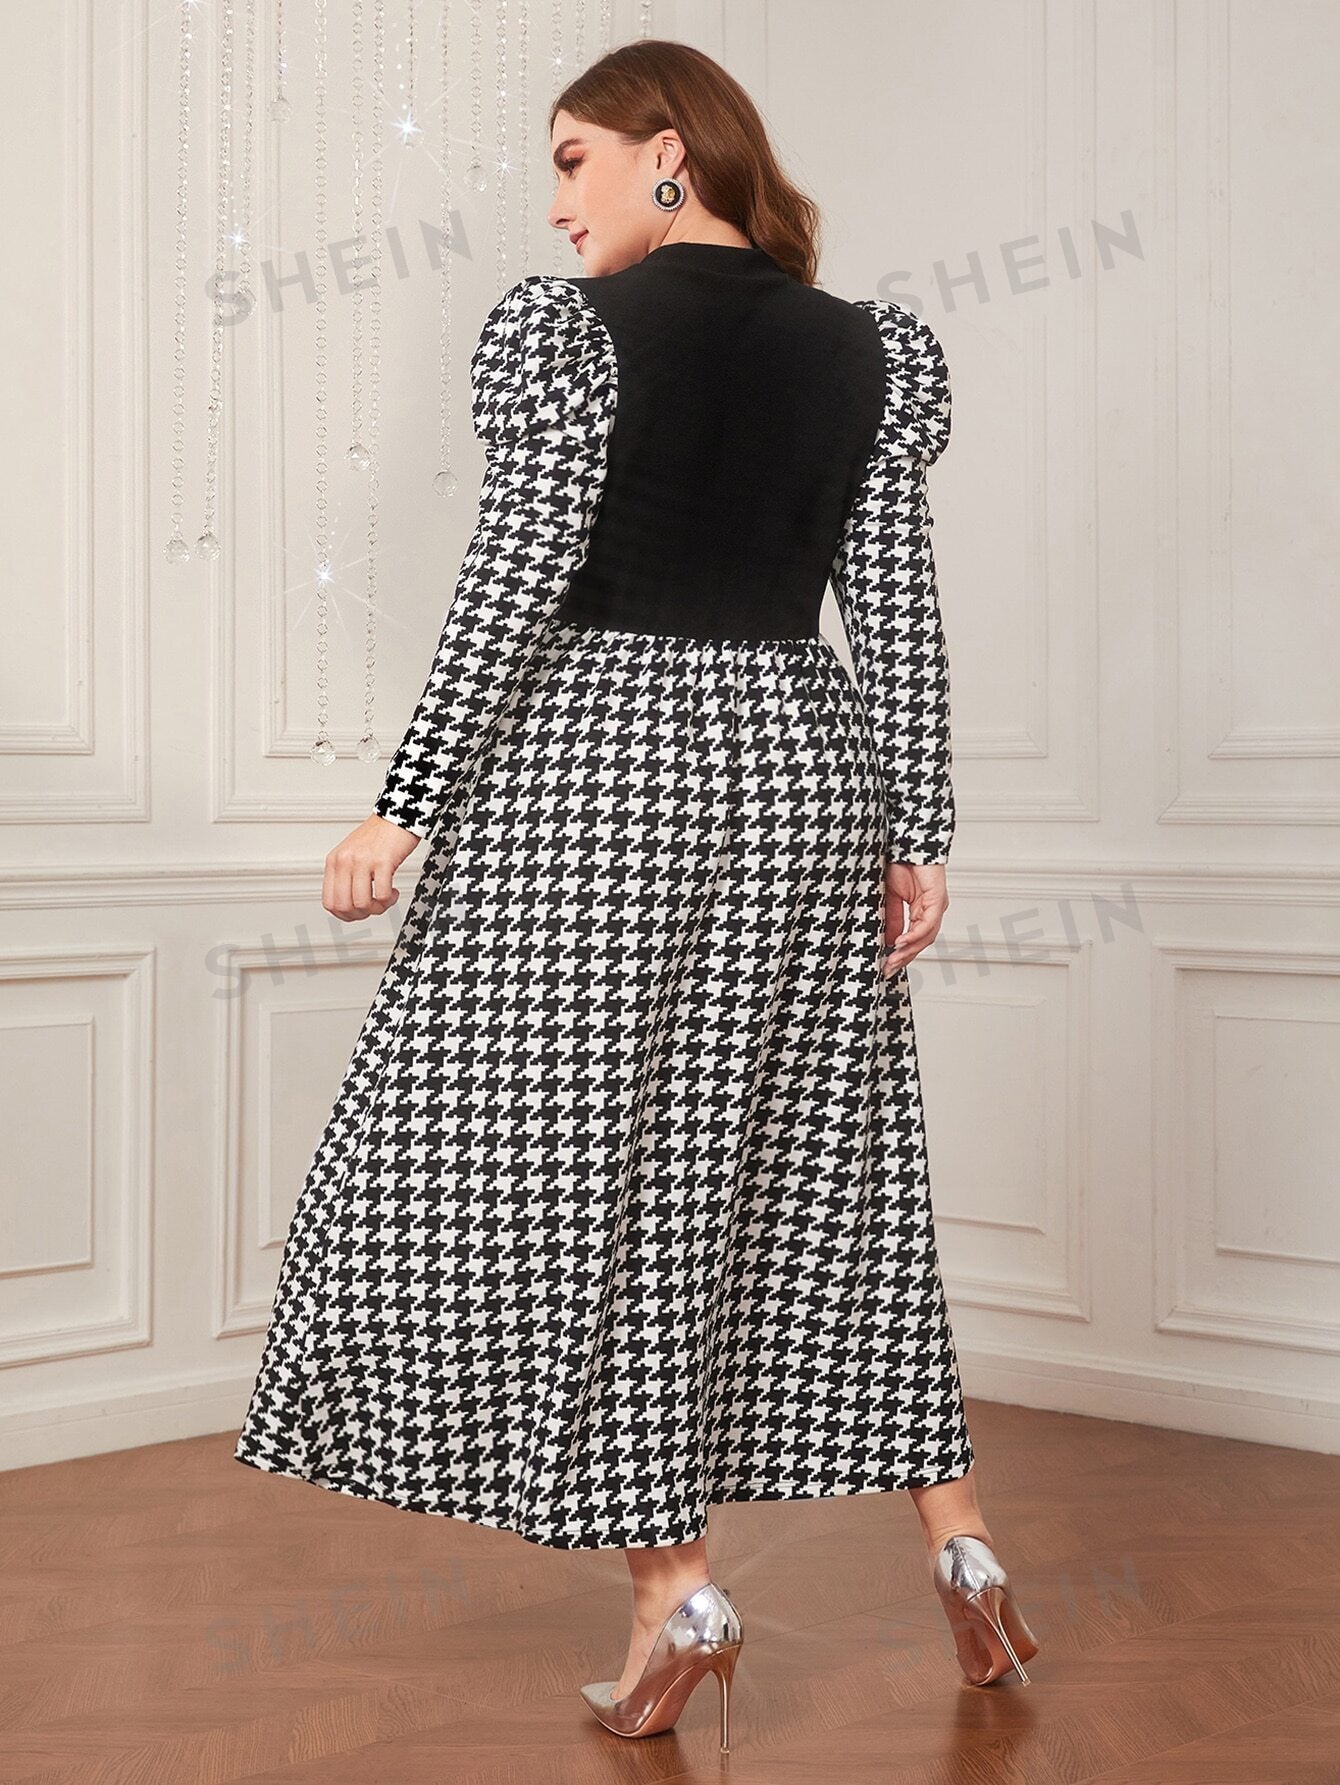 SHEIN Modely Plus Houndstooth Print Gigot Sleeve Dress Without Belt - Negative Apparel